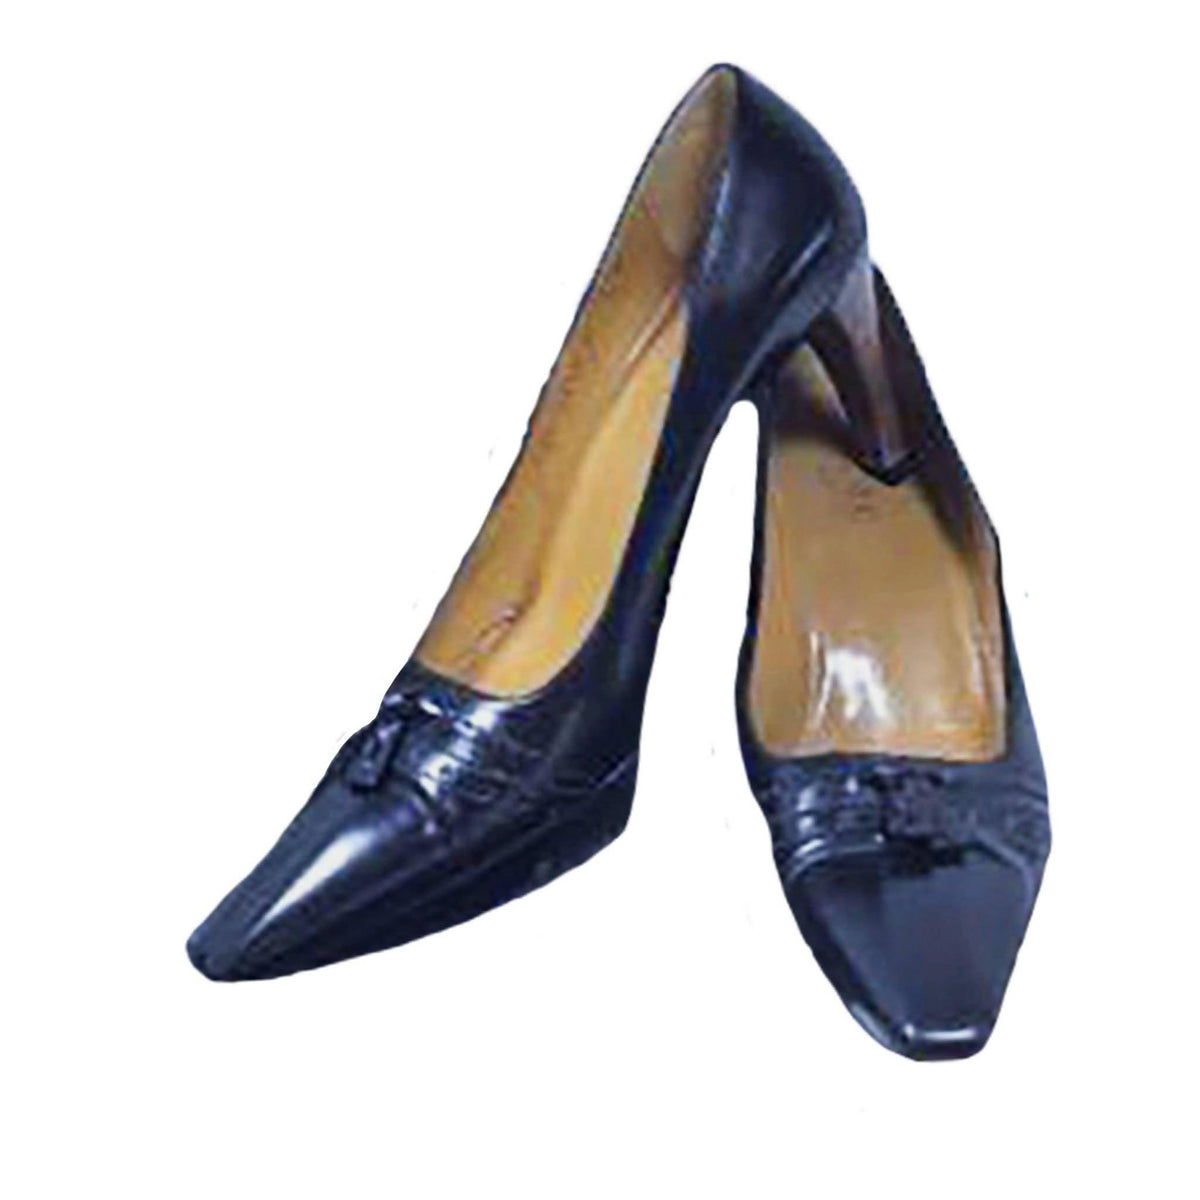 Pre-owned GUCCI Navy Blue Leather Heels | US 7 - EU 37 - theREMODA